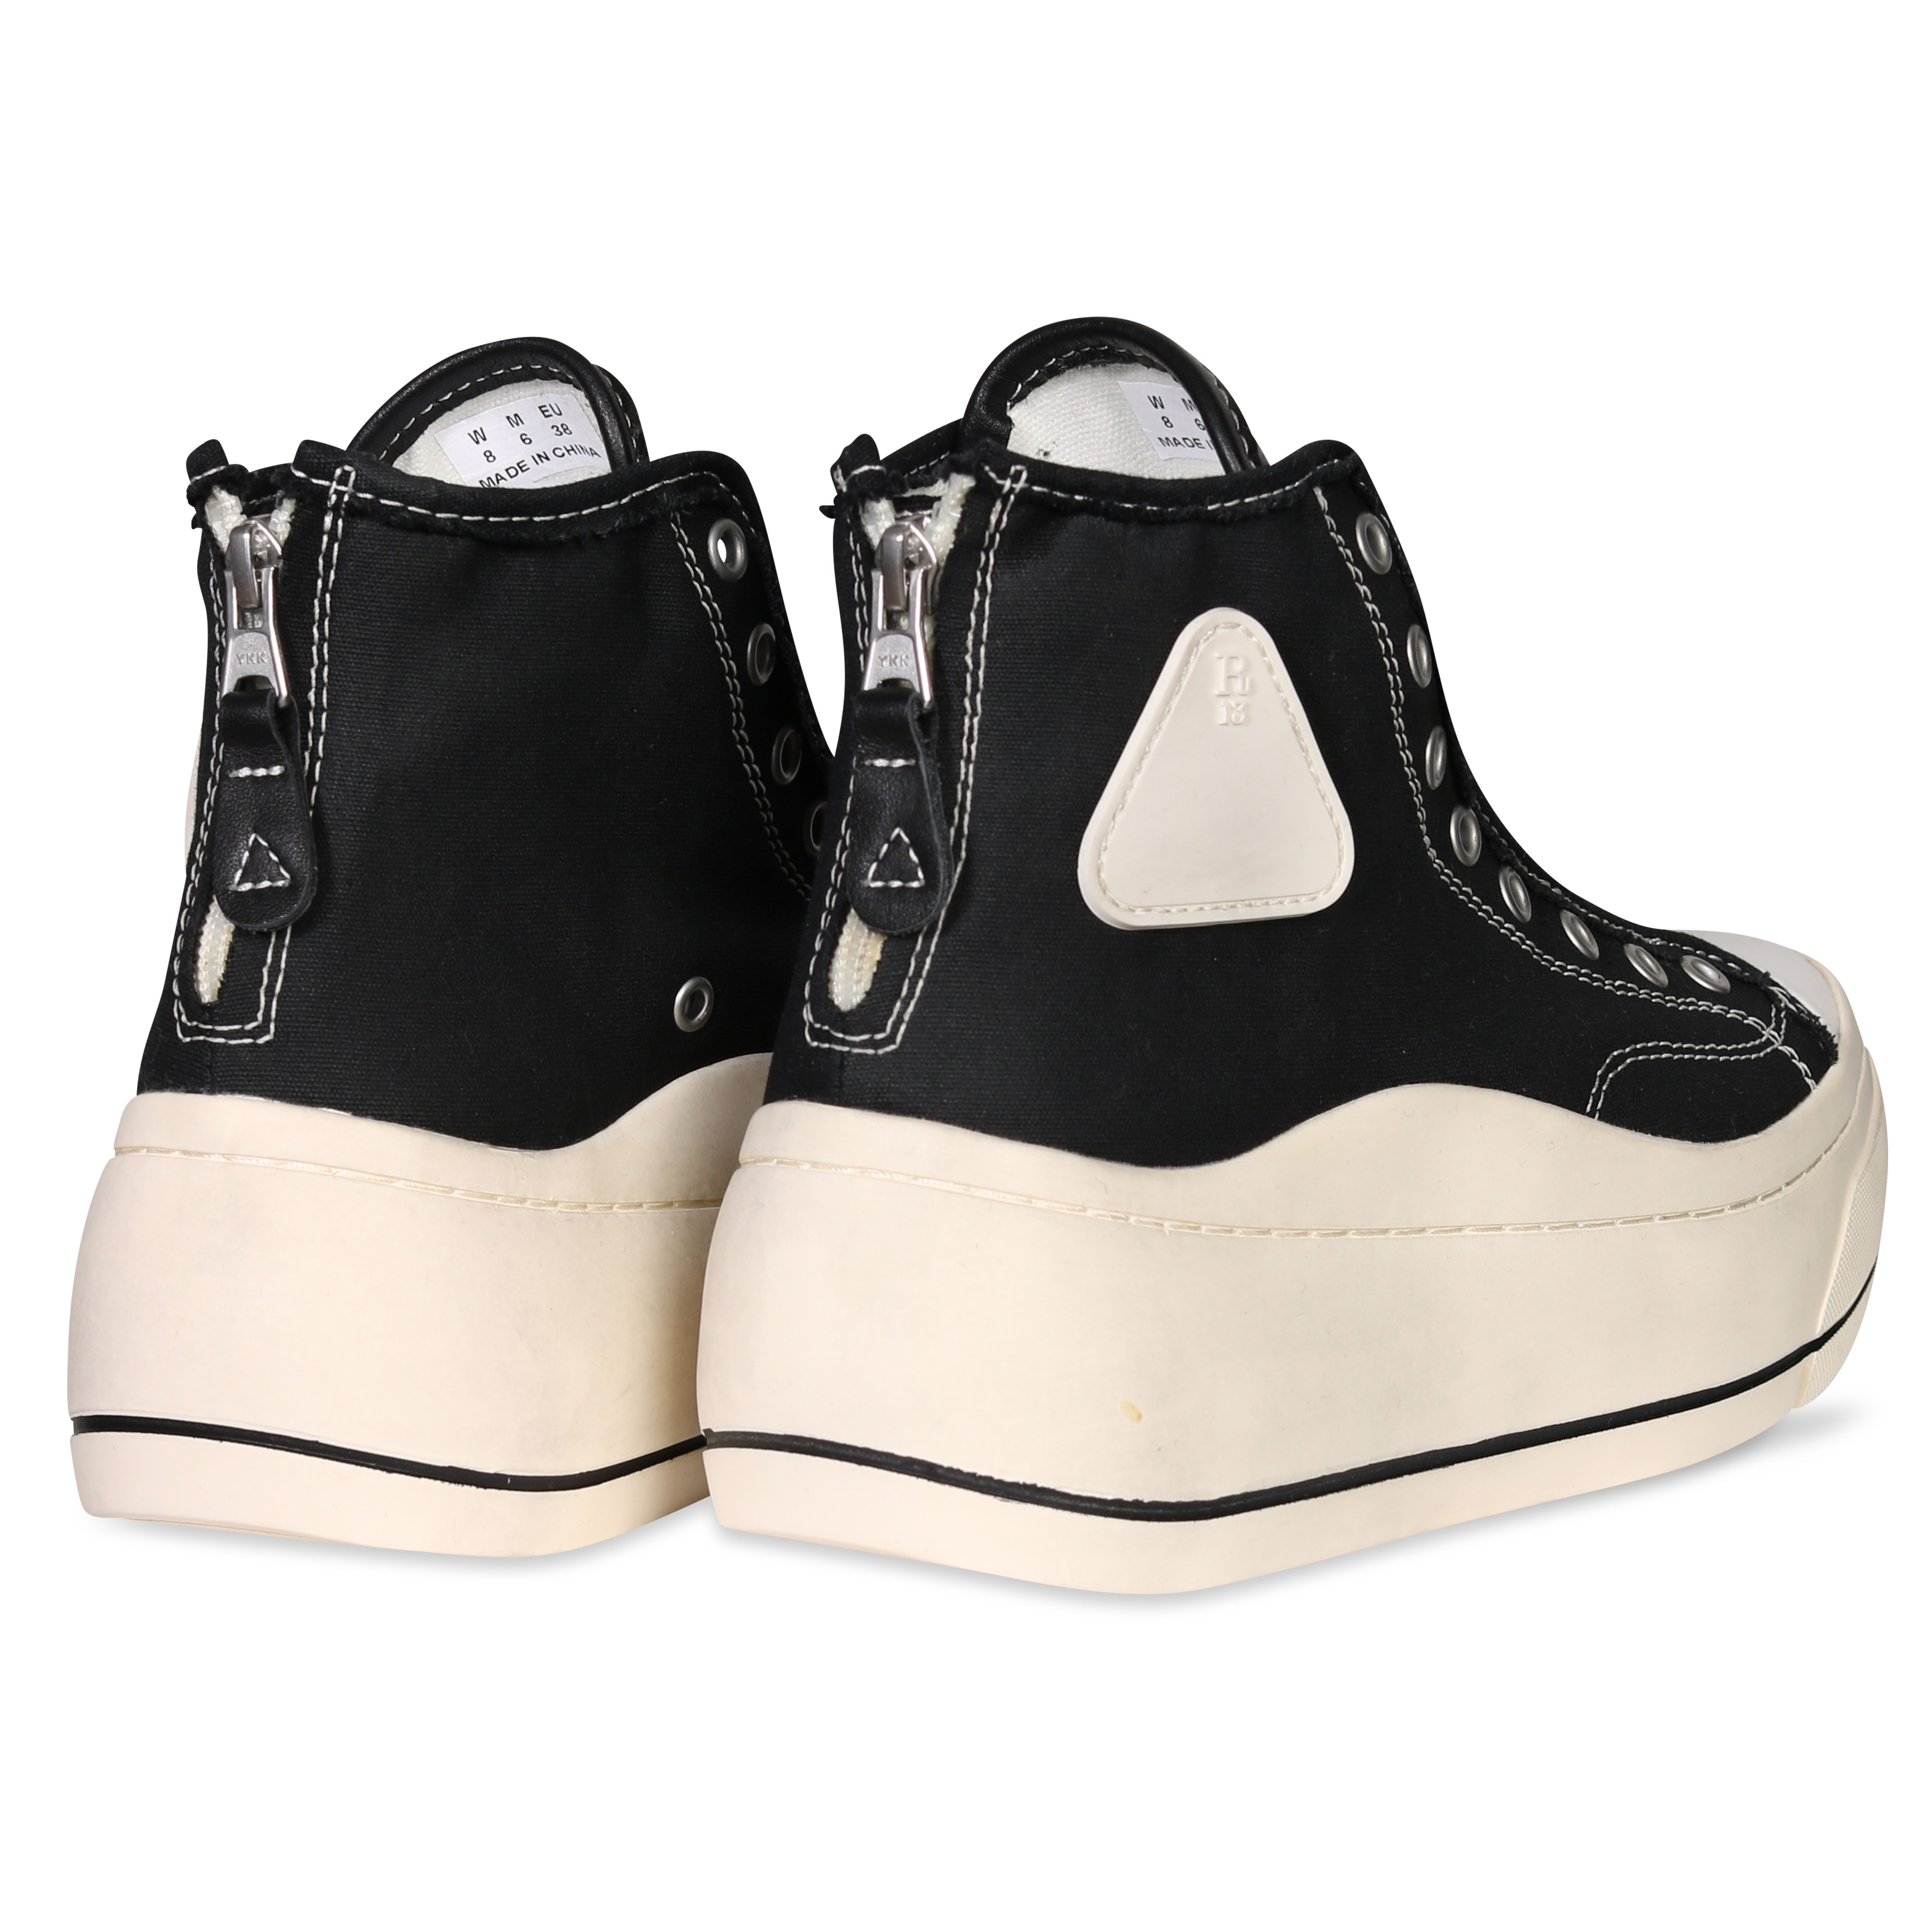 R13 High Top Sneaker Lace Free in Black 38